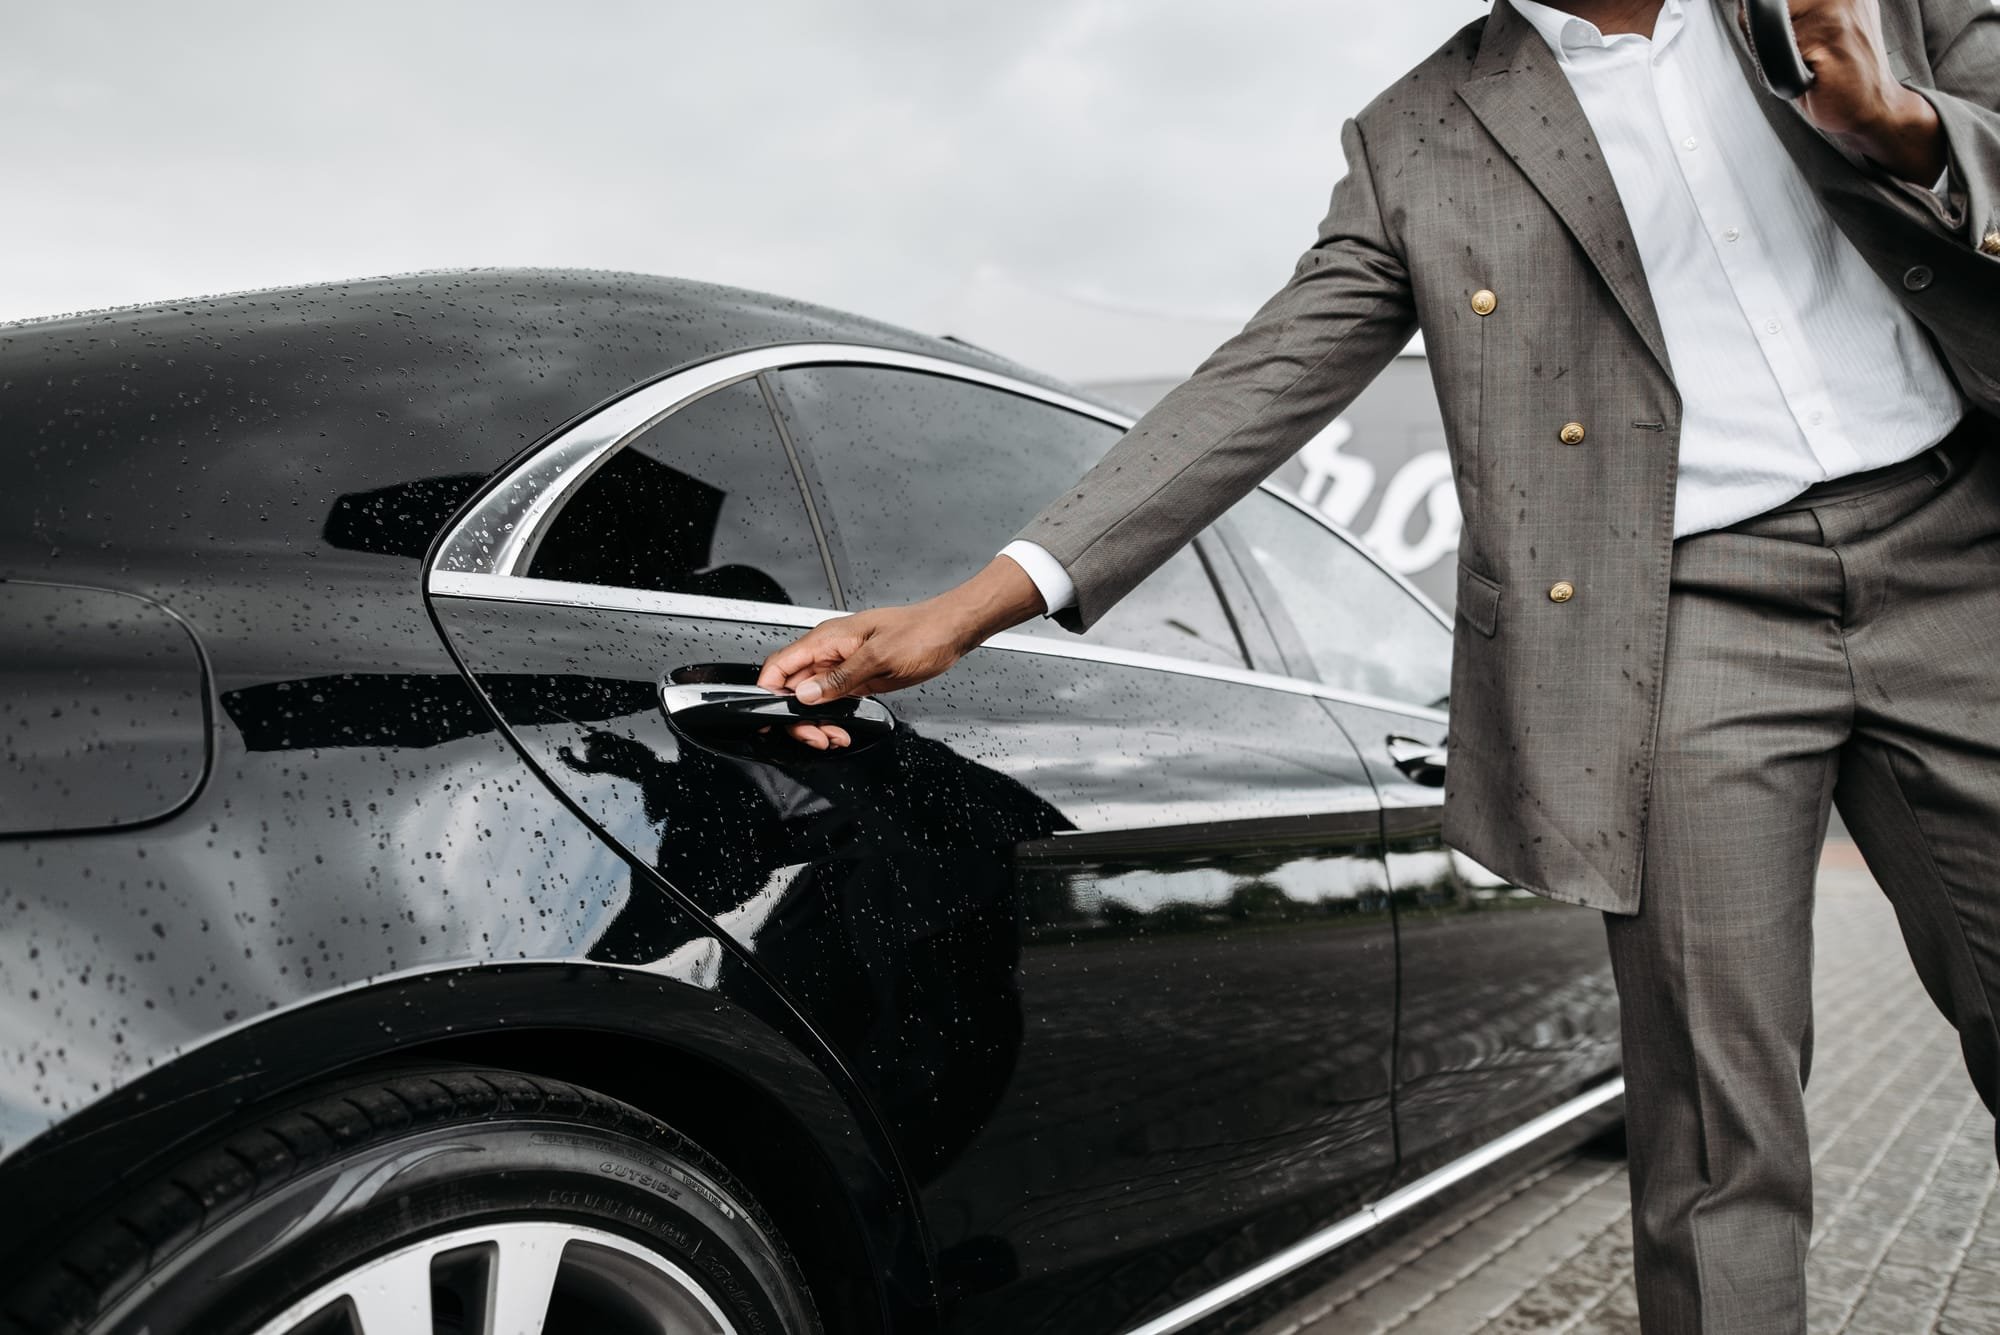 REASONS WHY IMPERIAL RIDE CHAUFFEUR SERVICE IS THE BEST